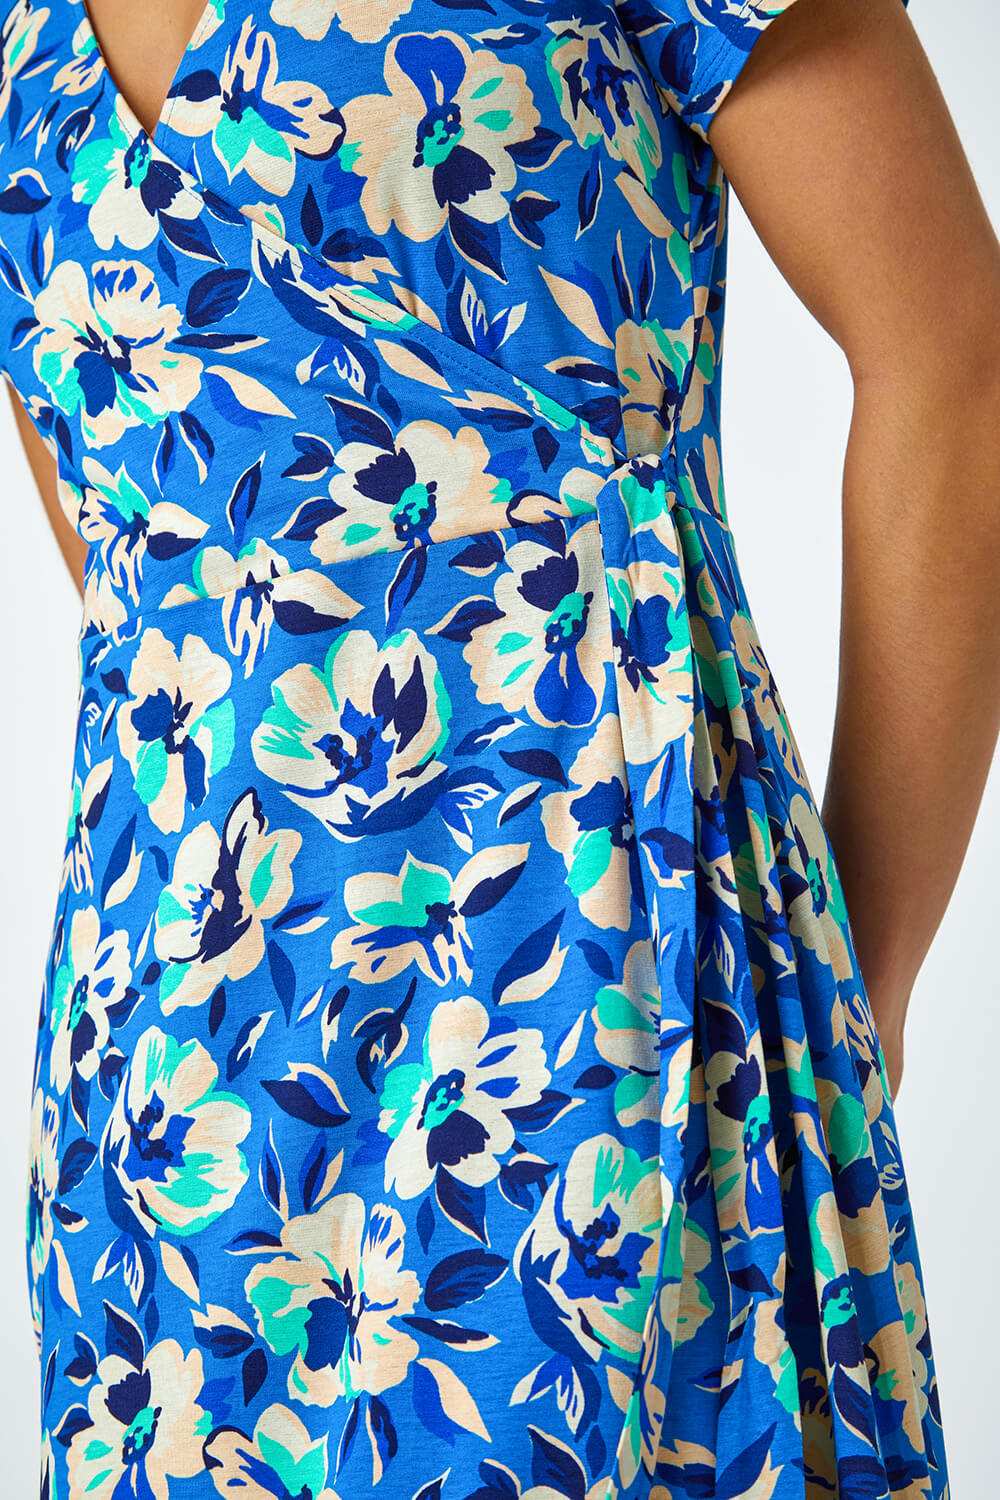 Turquoise Petite Floral Stretch Wrap Dress, Image 5 of 5